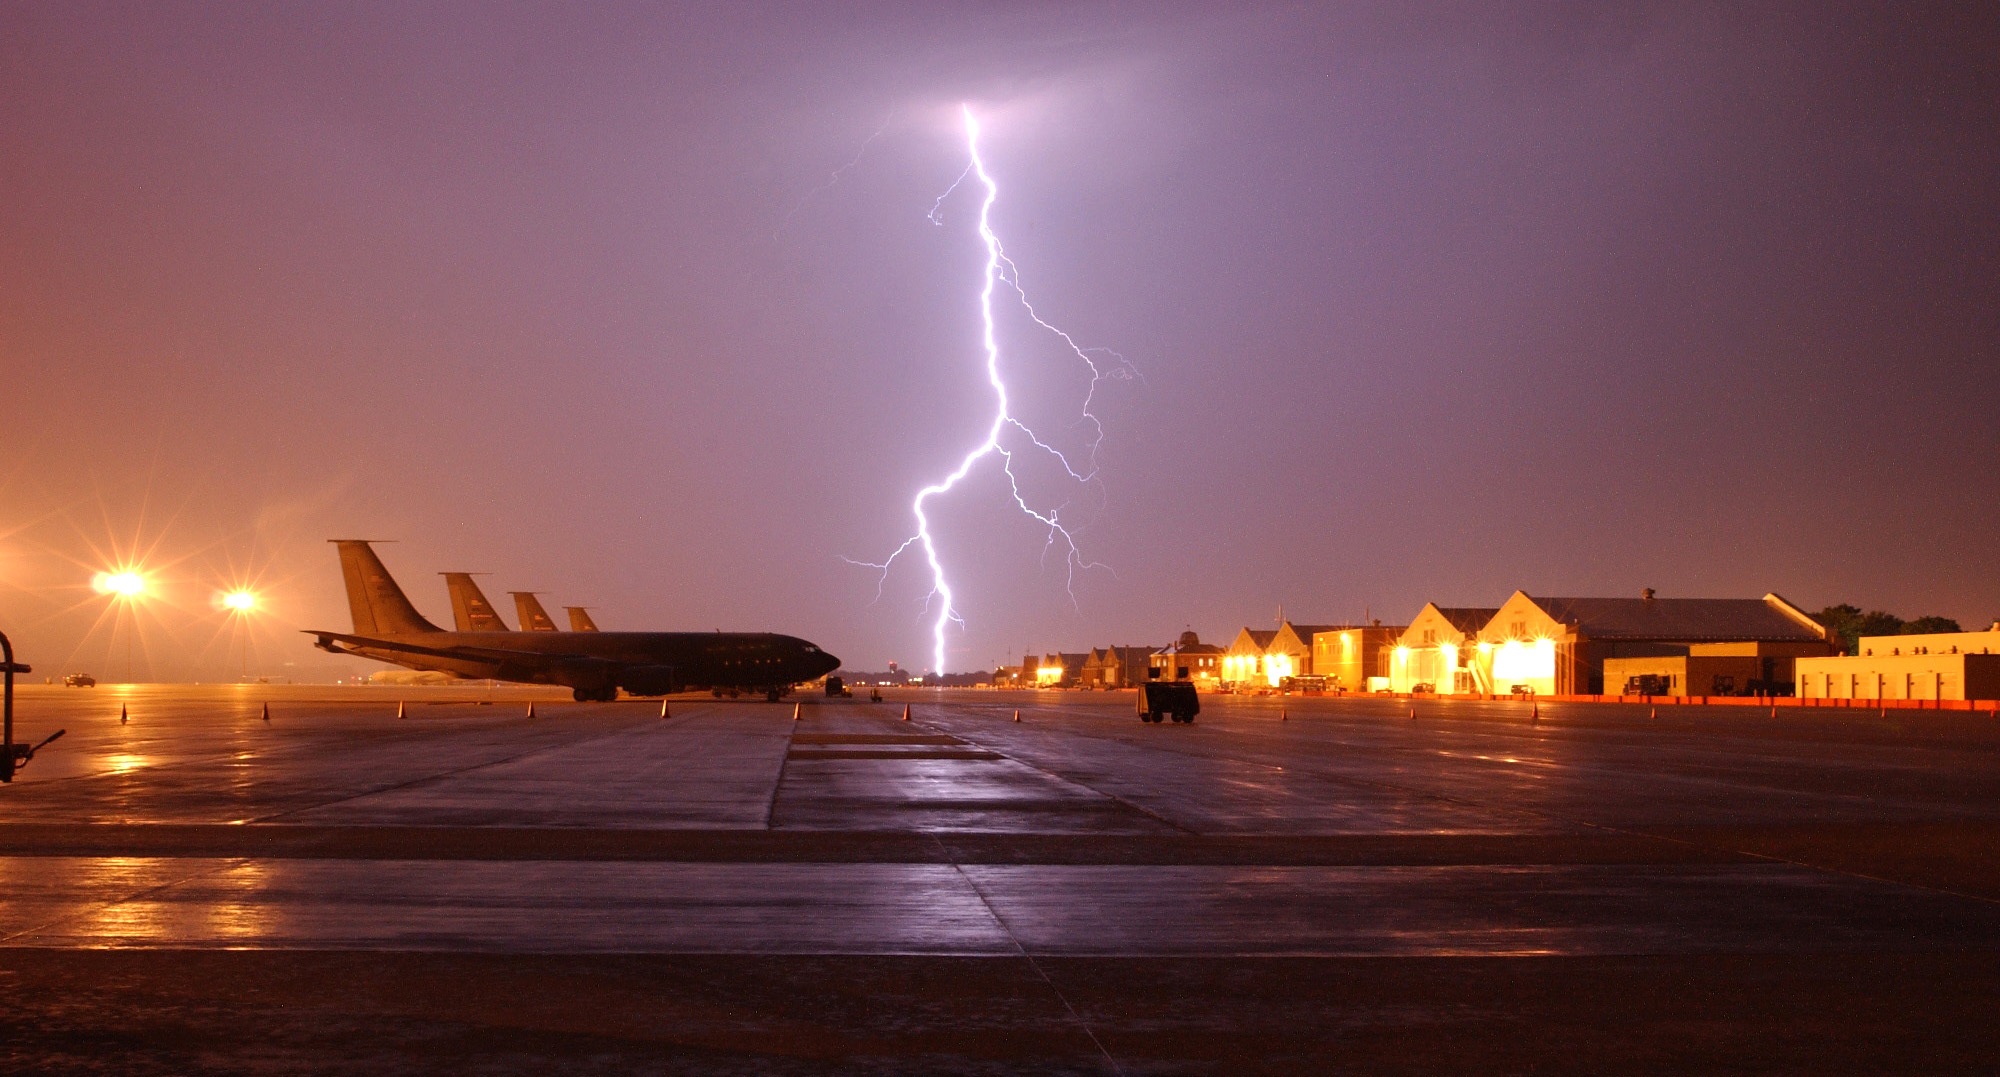 Lightning on the airport photo